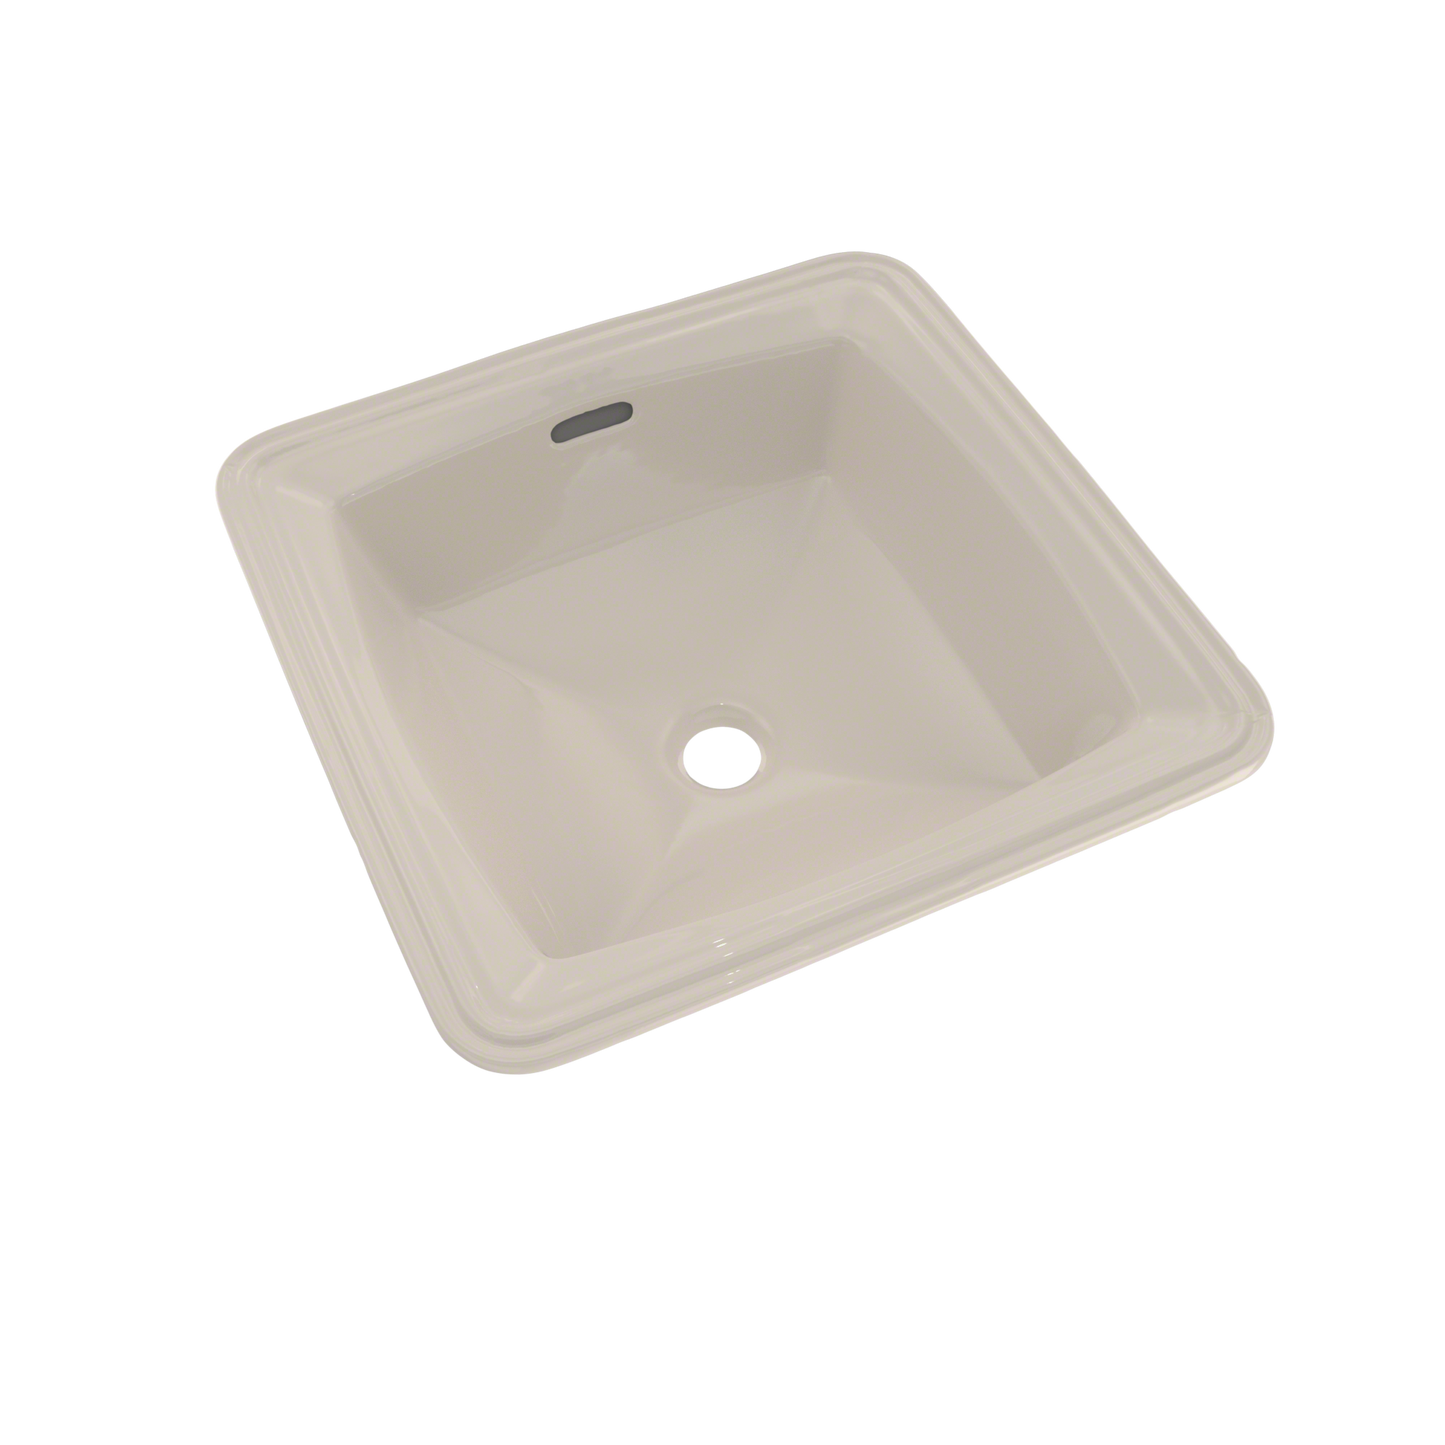 Toto LT491G#12 - Connelly Vitreous China Undermount Square Bathroom Sink, 17'' L x 17'' W x 7.5'' H-